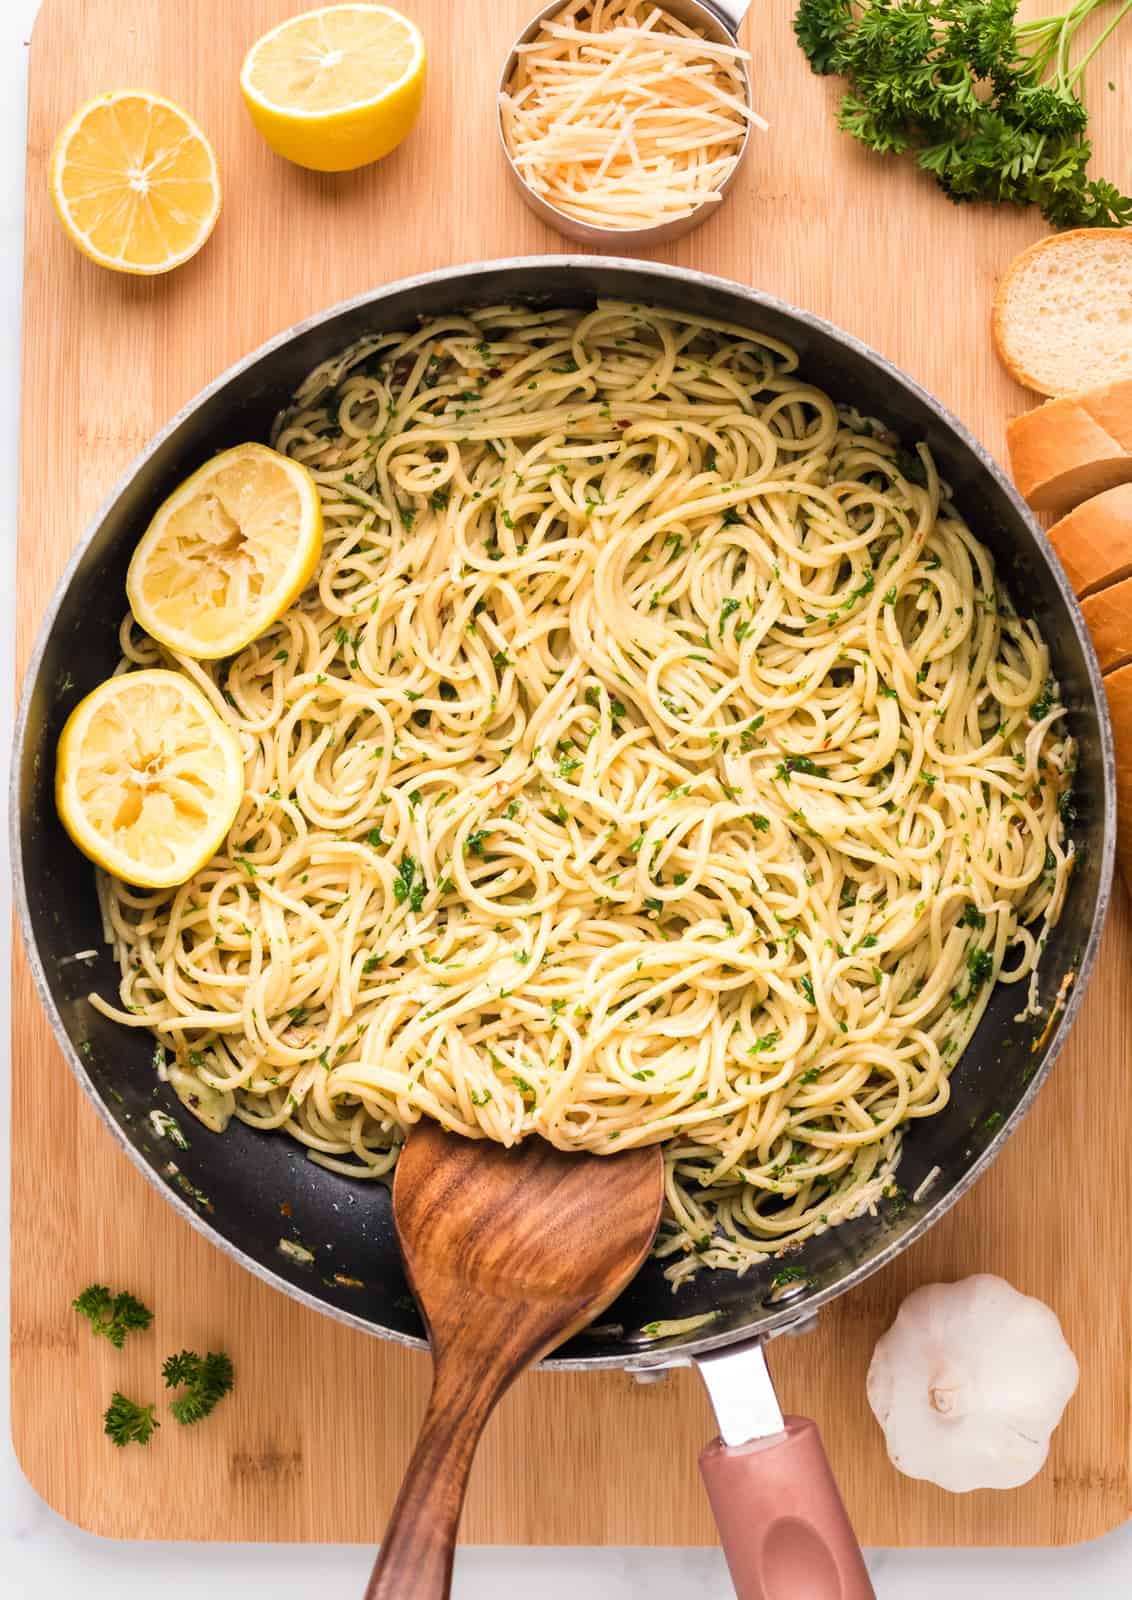 Spaghetti Aglio e Olio in pan with spoon and lemons.